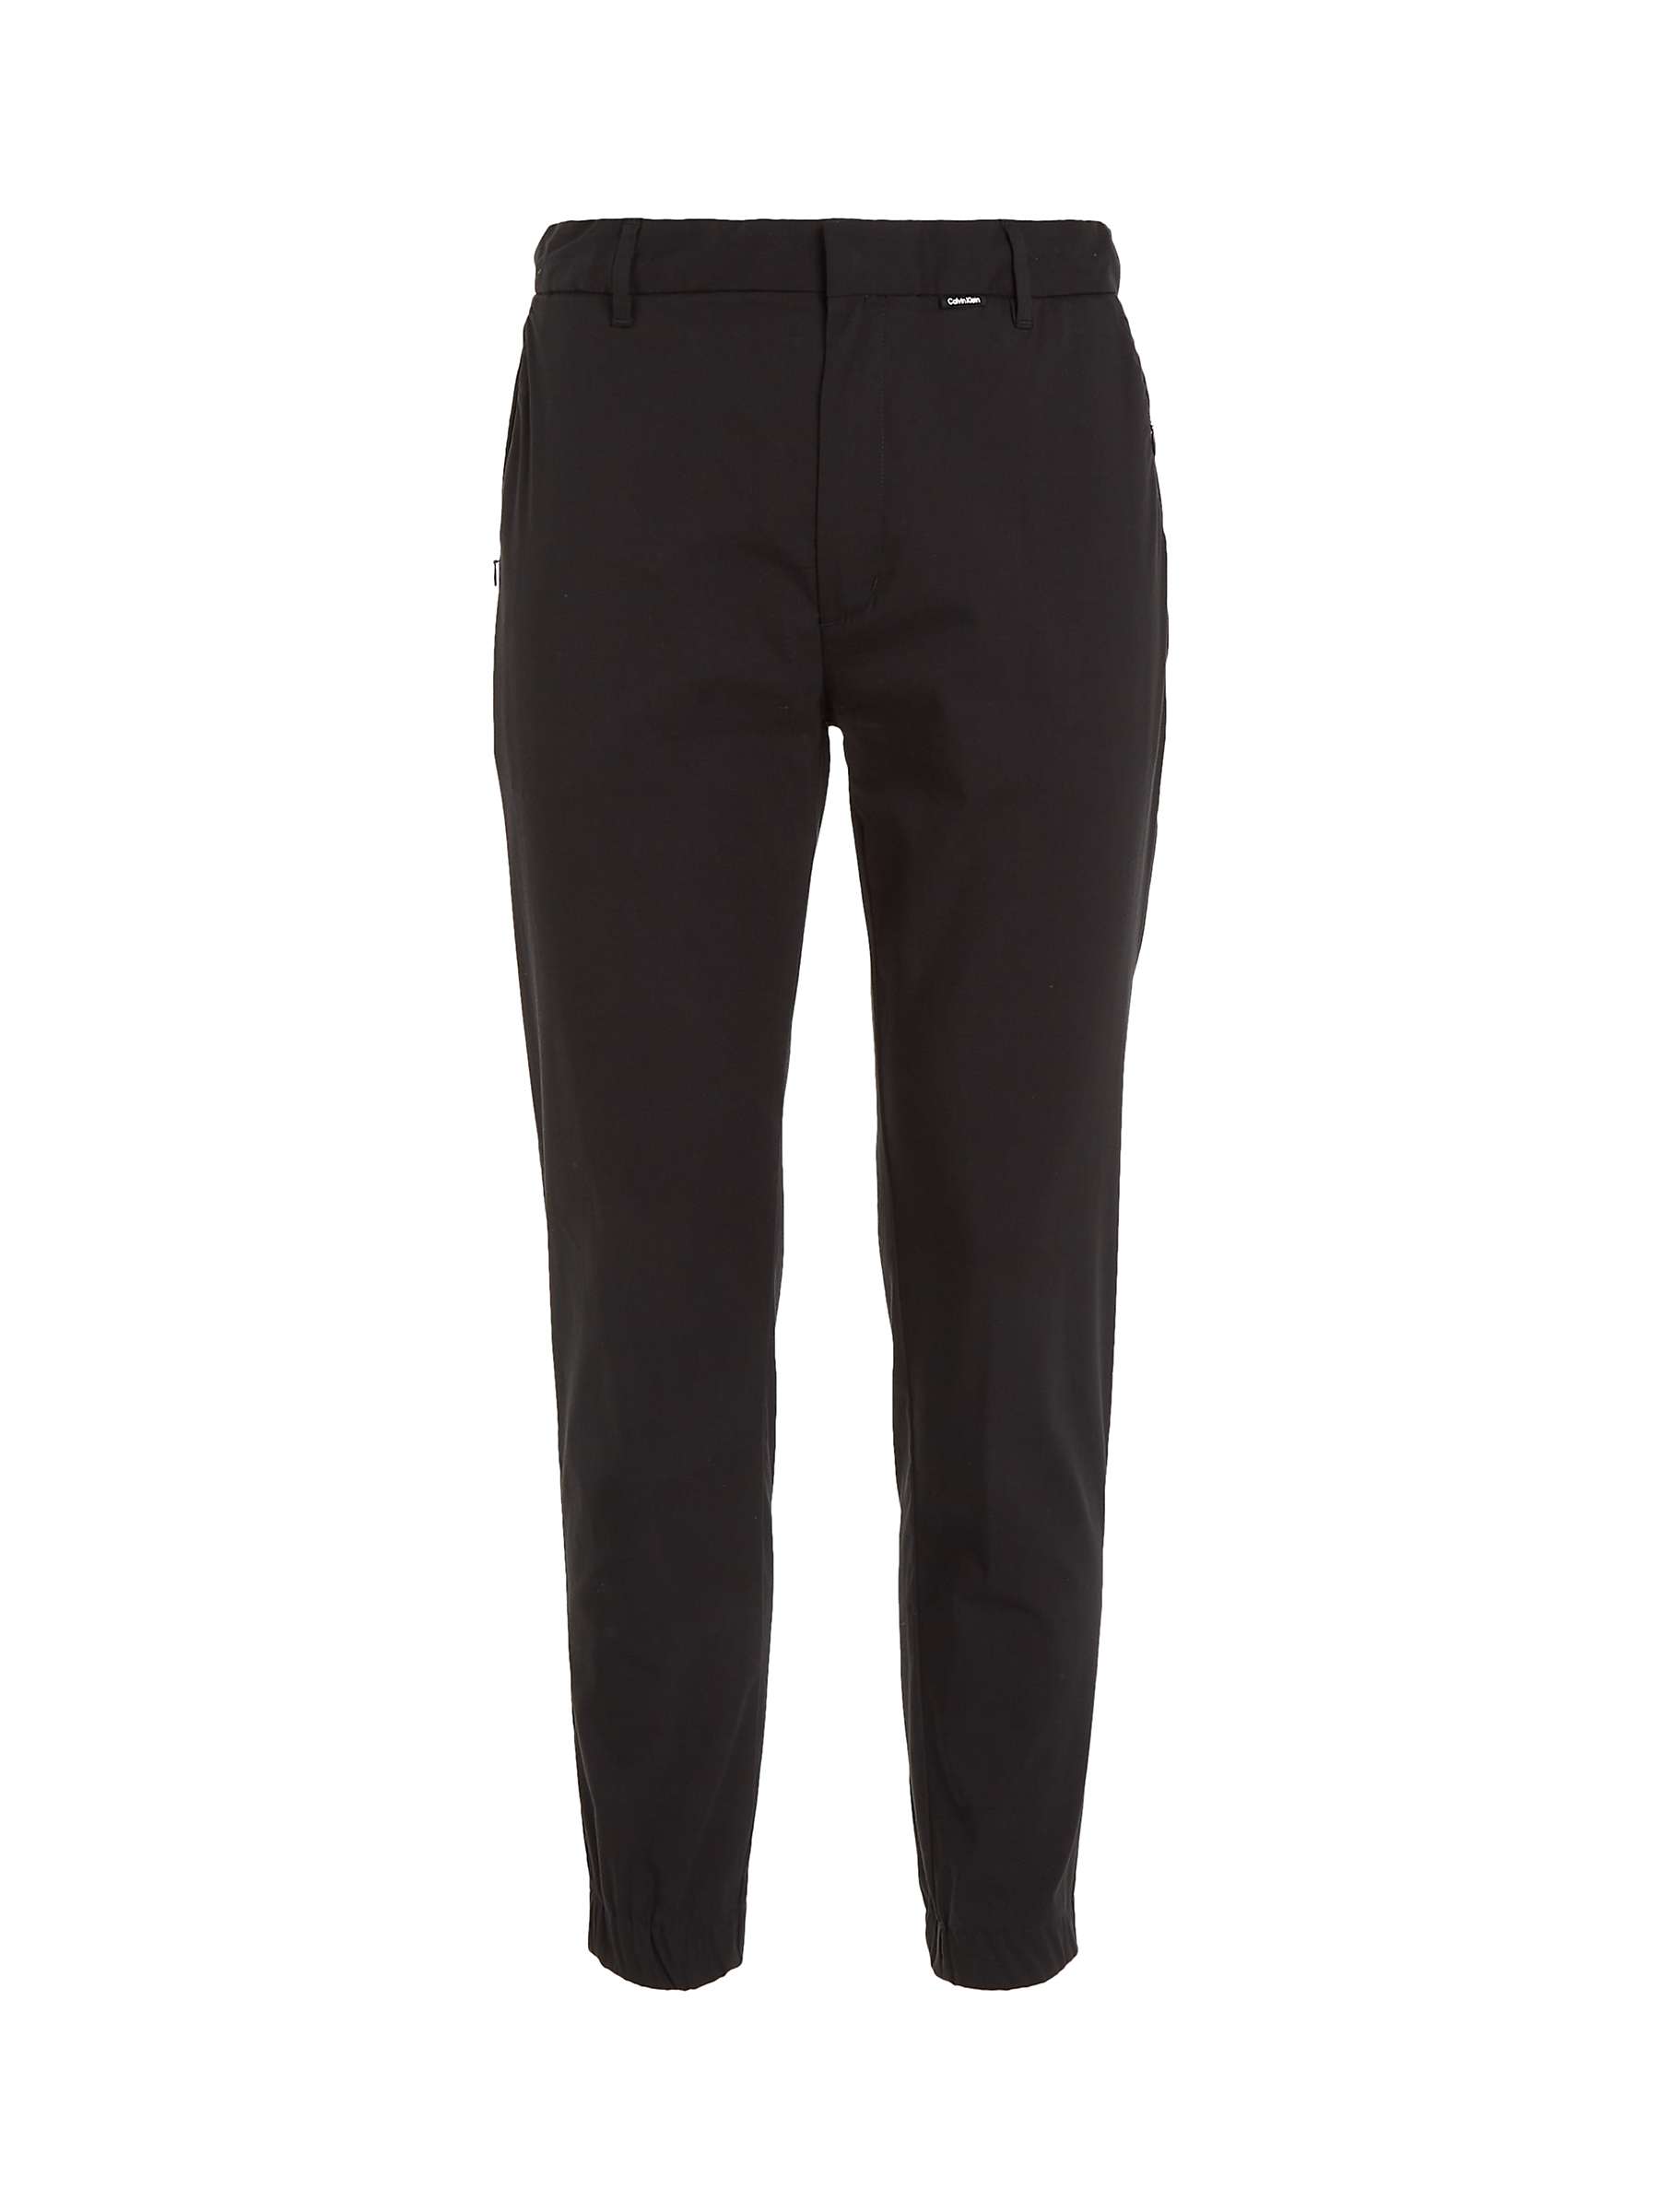 Buy Calvin Klein Tapered Trousers, Black Online at johnlewis.com